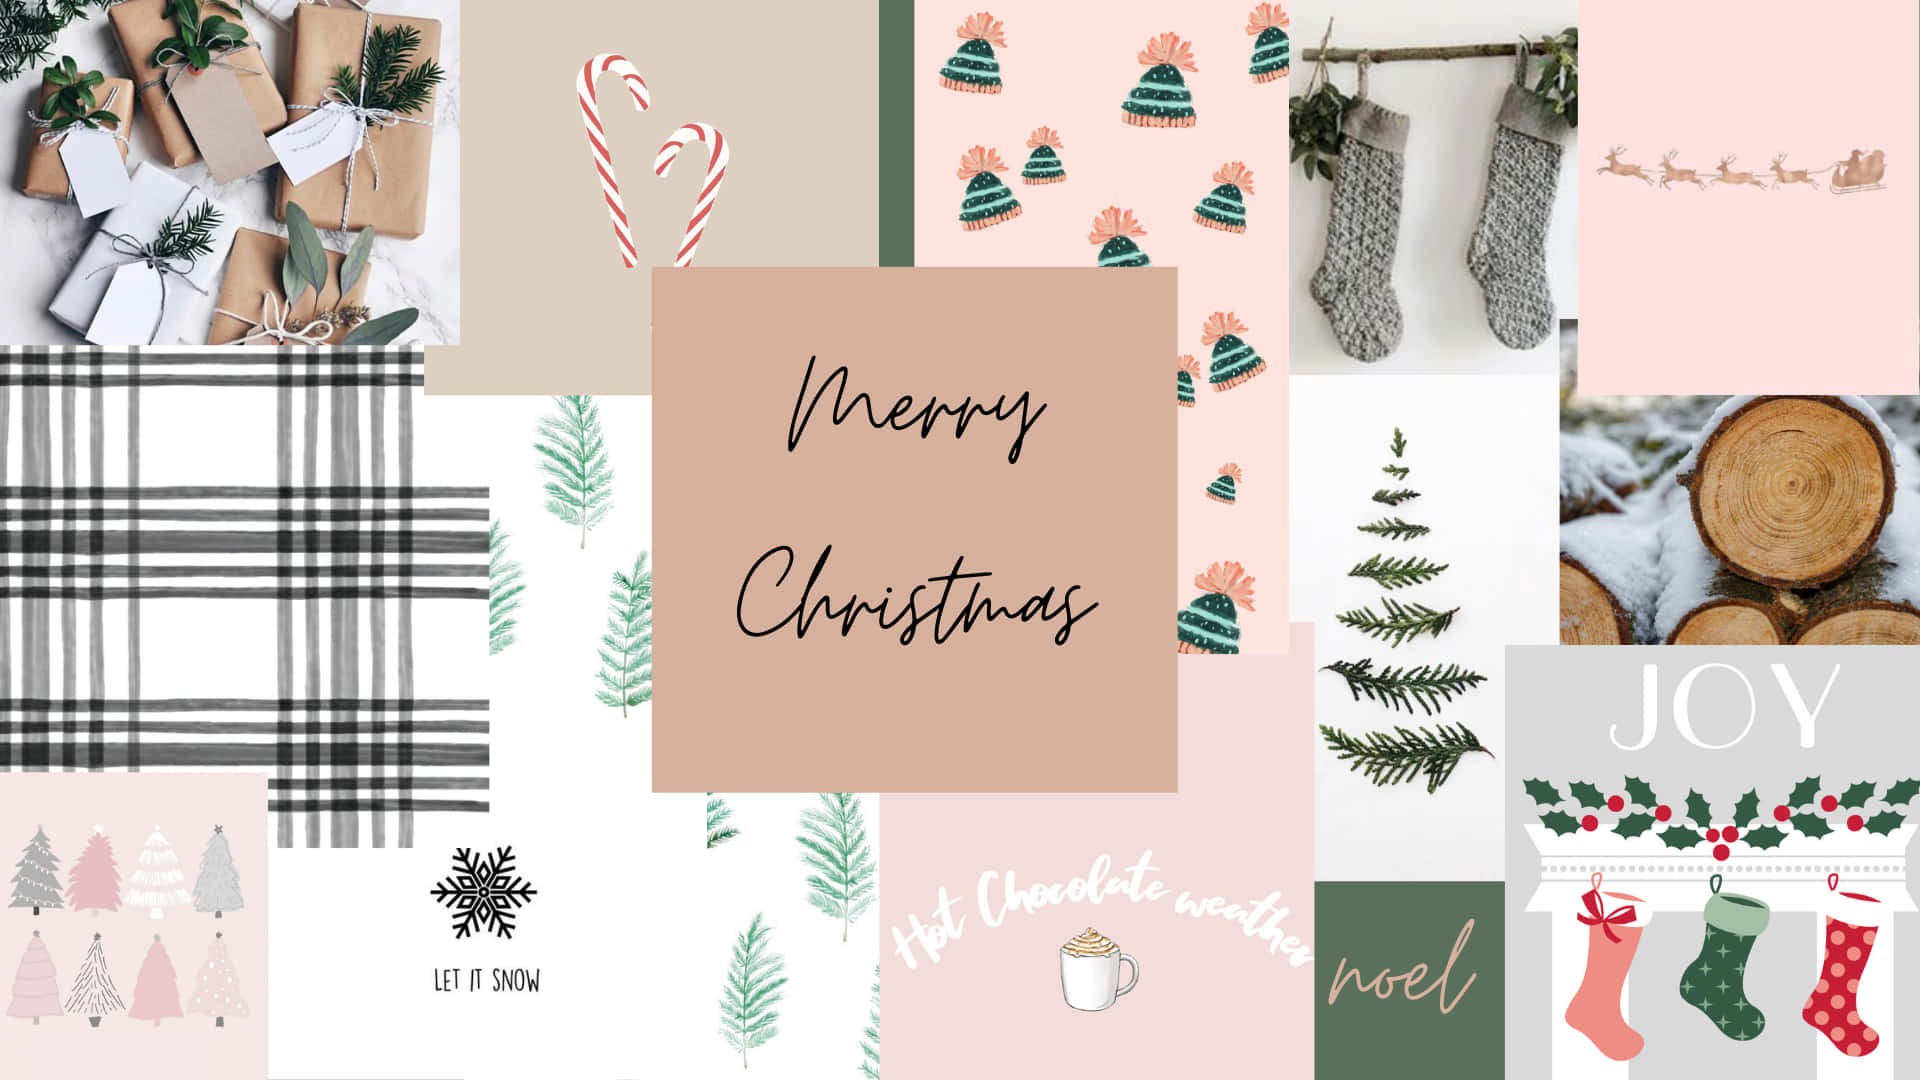 Download Get into the Christmas spirit with a festive Mac aesthetic  wallpaper Wallpaper  Wallpaperscom